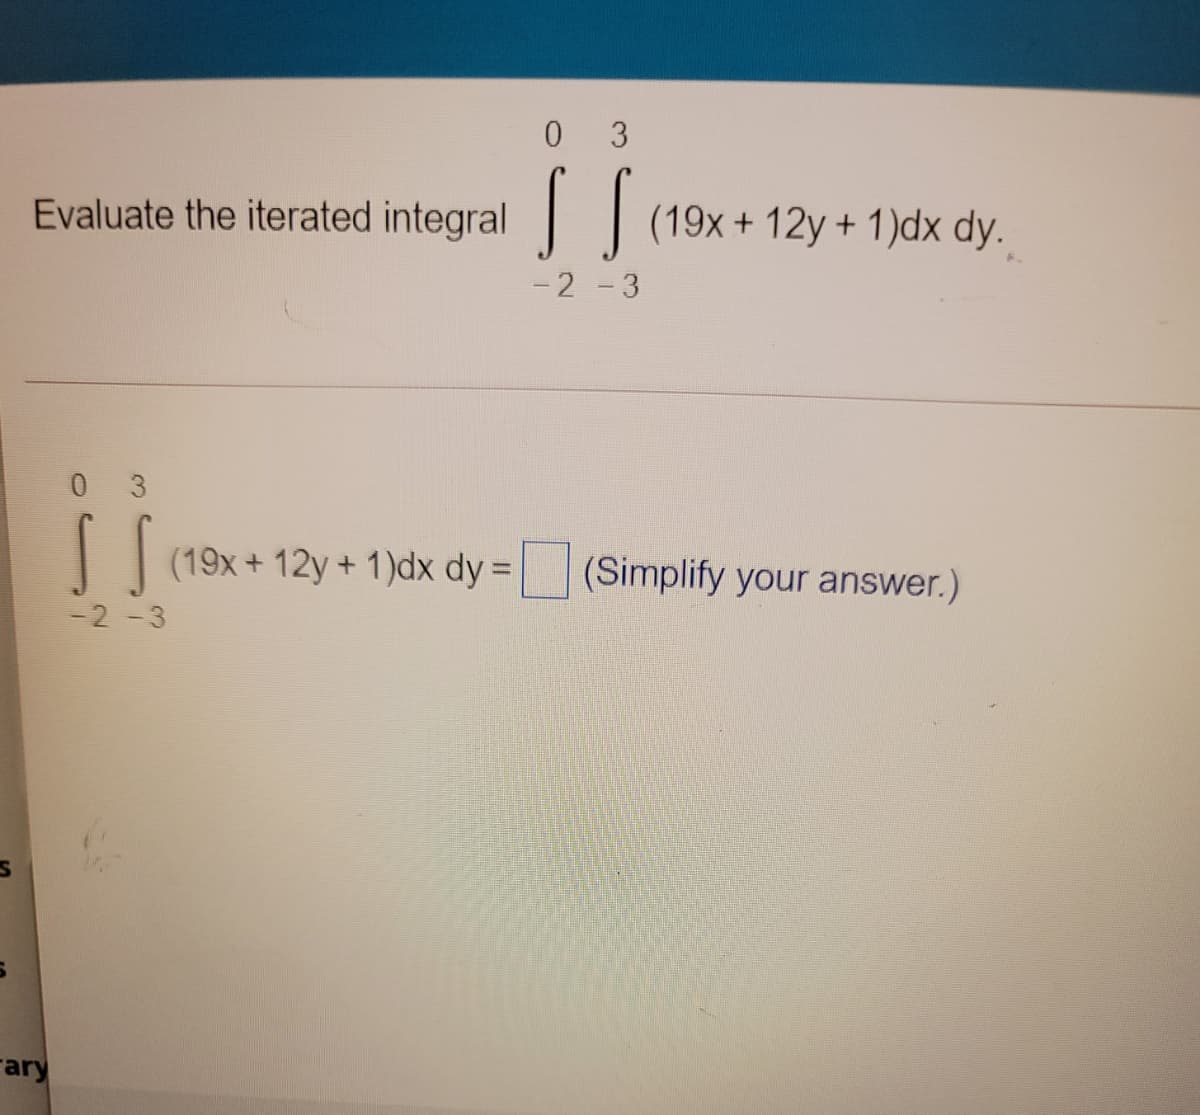 0 3
Evaluate the iterated integral (19x+ 12y + 1)dx dy.
- 2 -3
0 3
(19x + 12y + 1)dx dy = (Simplify your answer.)
-2 -3
Fary
